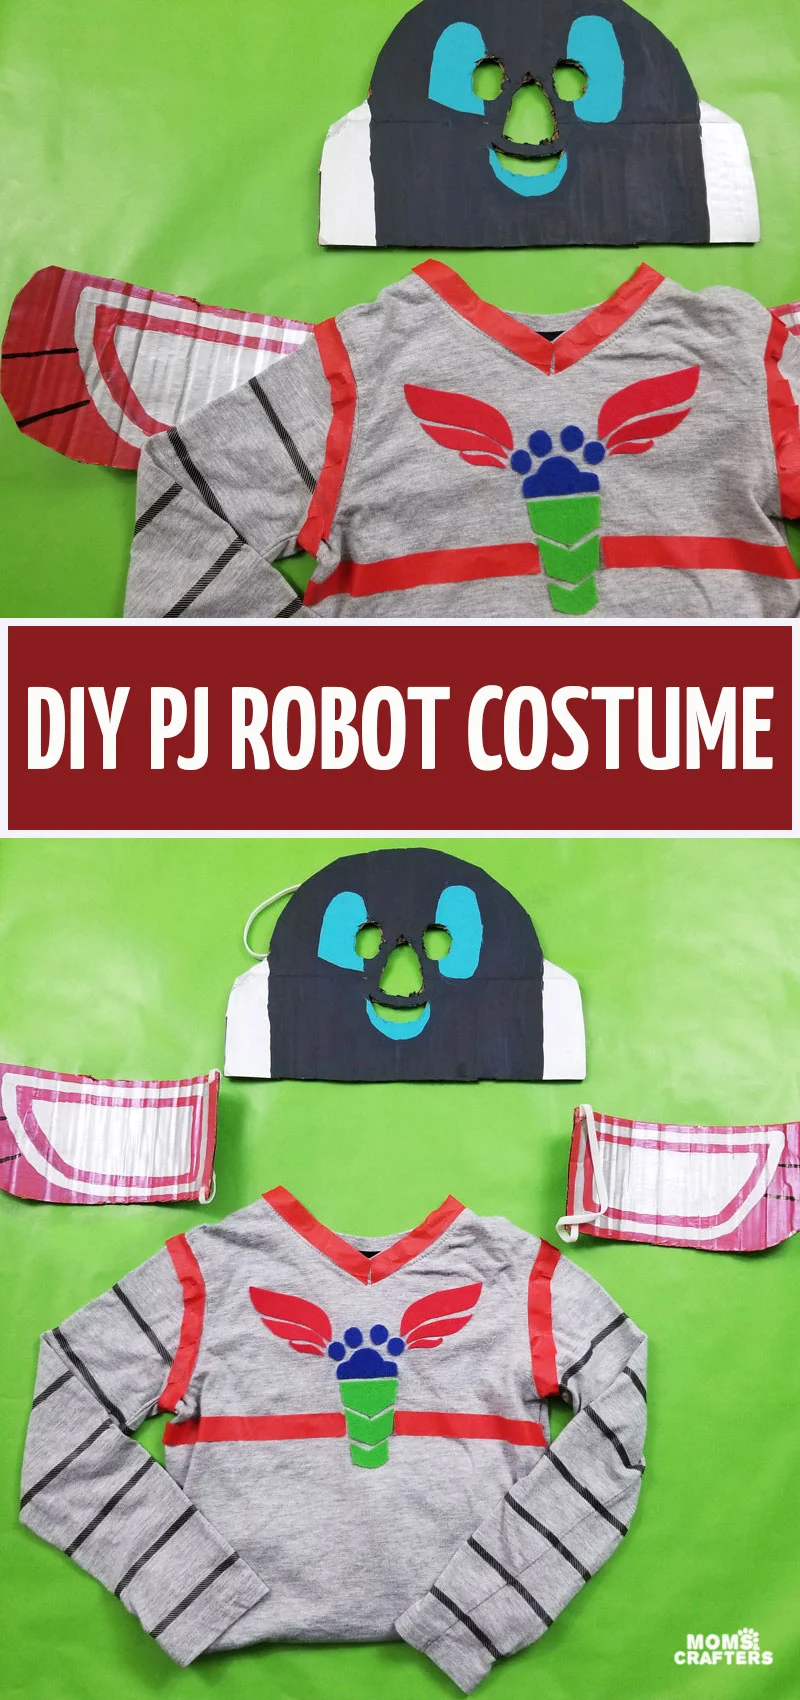 Craft your own PJ Robot costume - a fun DIY PJ Masks costume idea to make for Halloween, or Purim! This fun costume is made from an upcycled cardboard box and uses normal clothes that can be reused.